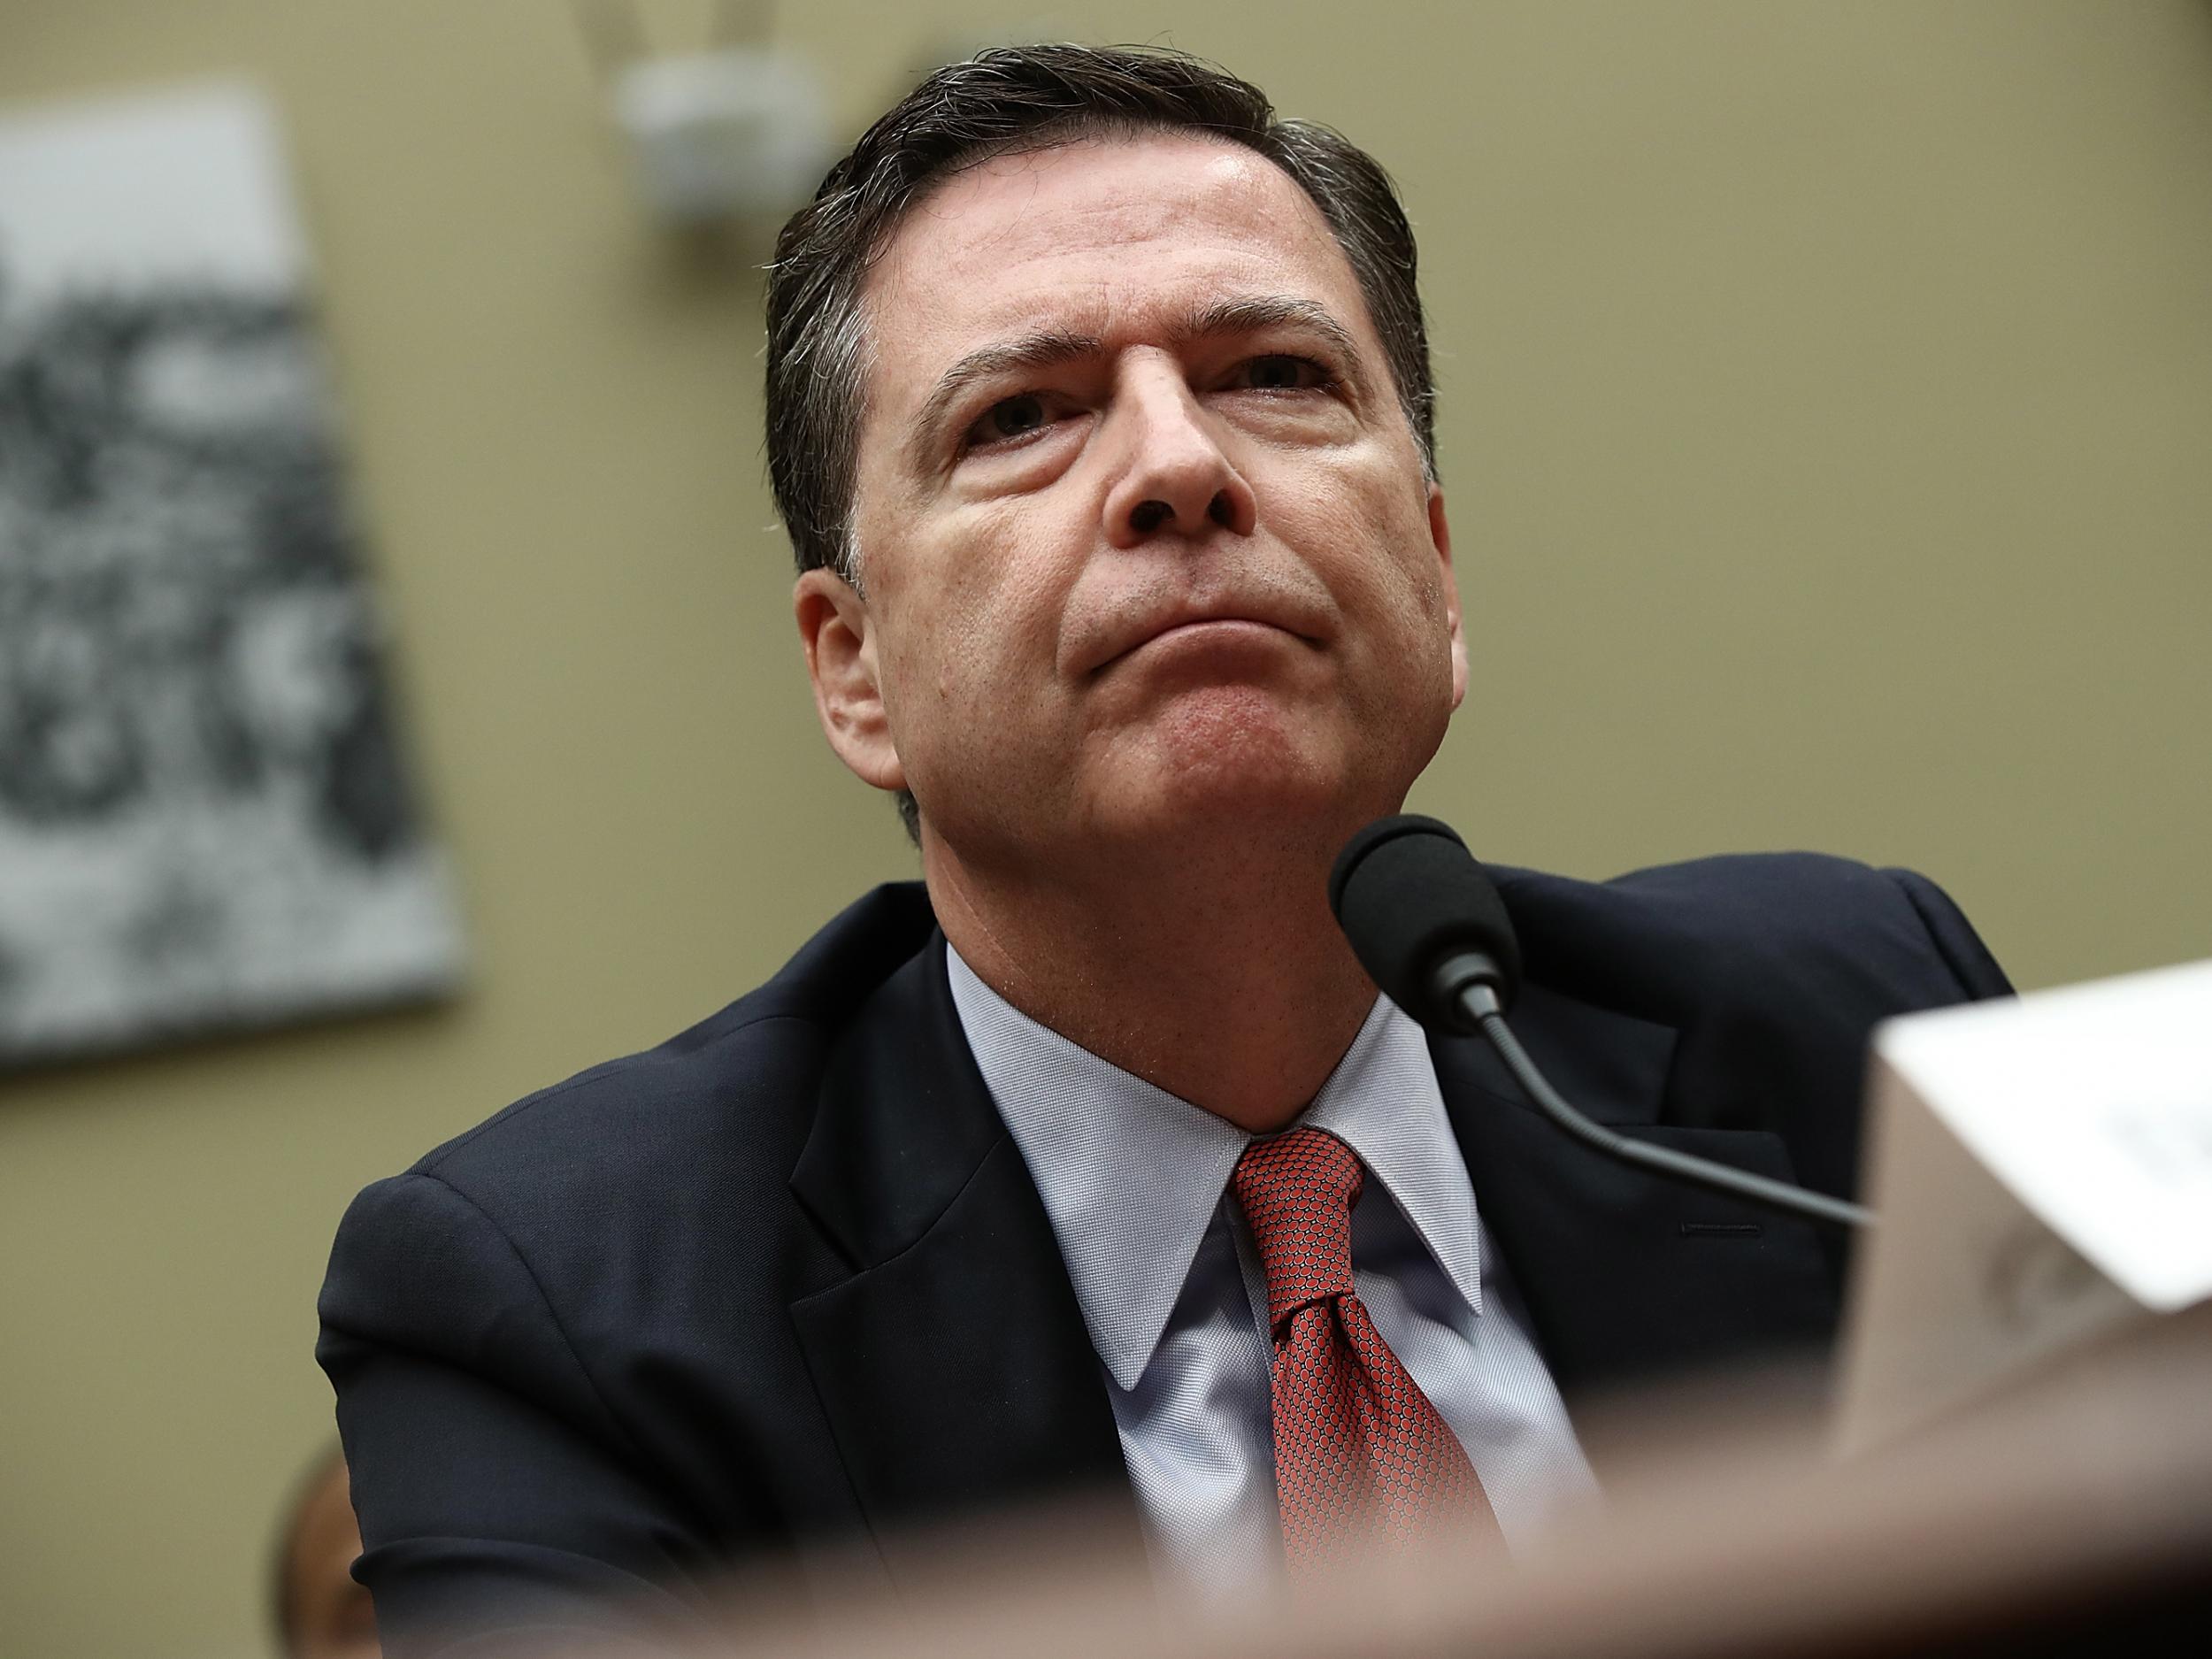 The FBI, headed by Republican James Comey, has been accused by Hillary Clinton's campaign manager of not calling out the Trump administration when the allegations first emerged